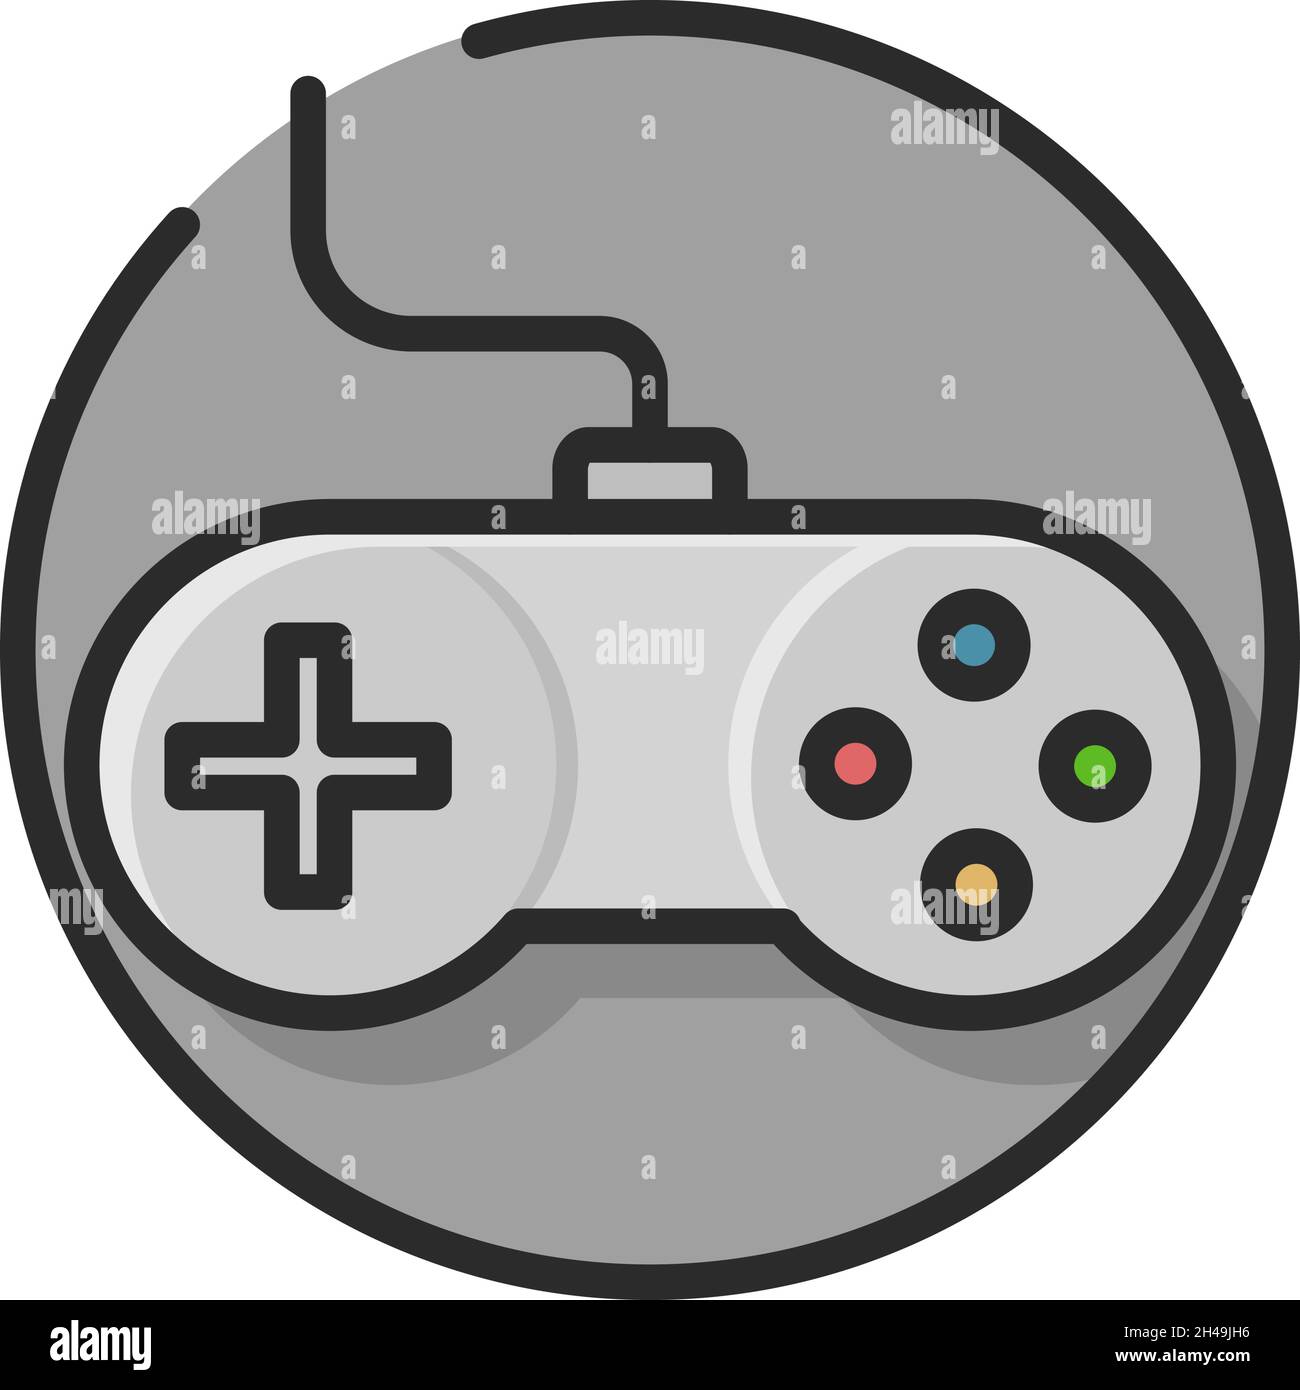 Game joystick or pad icon. Game controller. Stock Vector